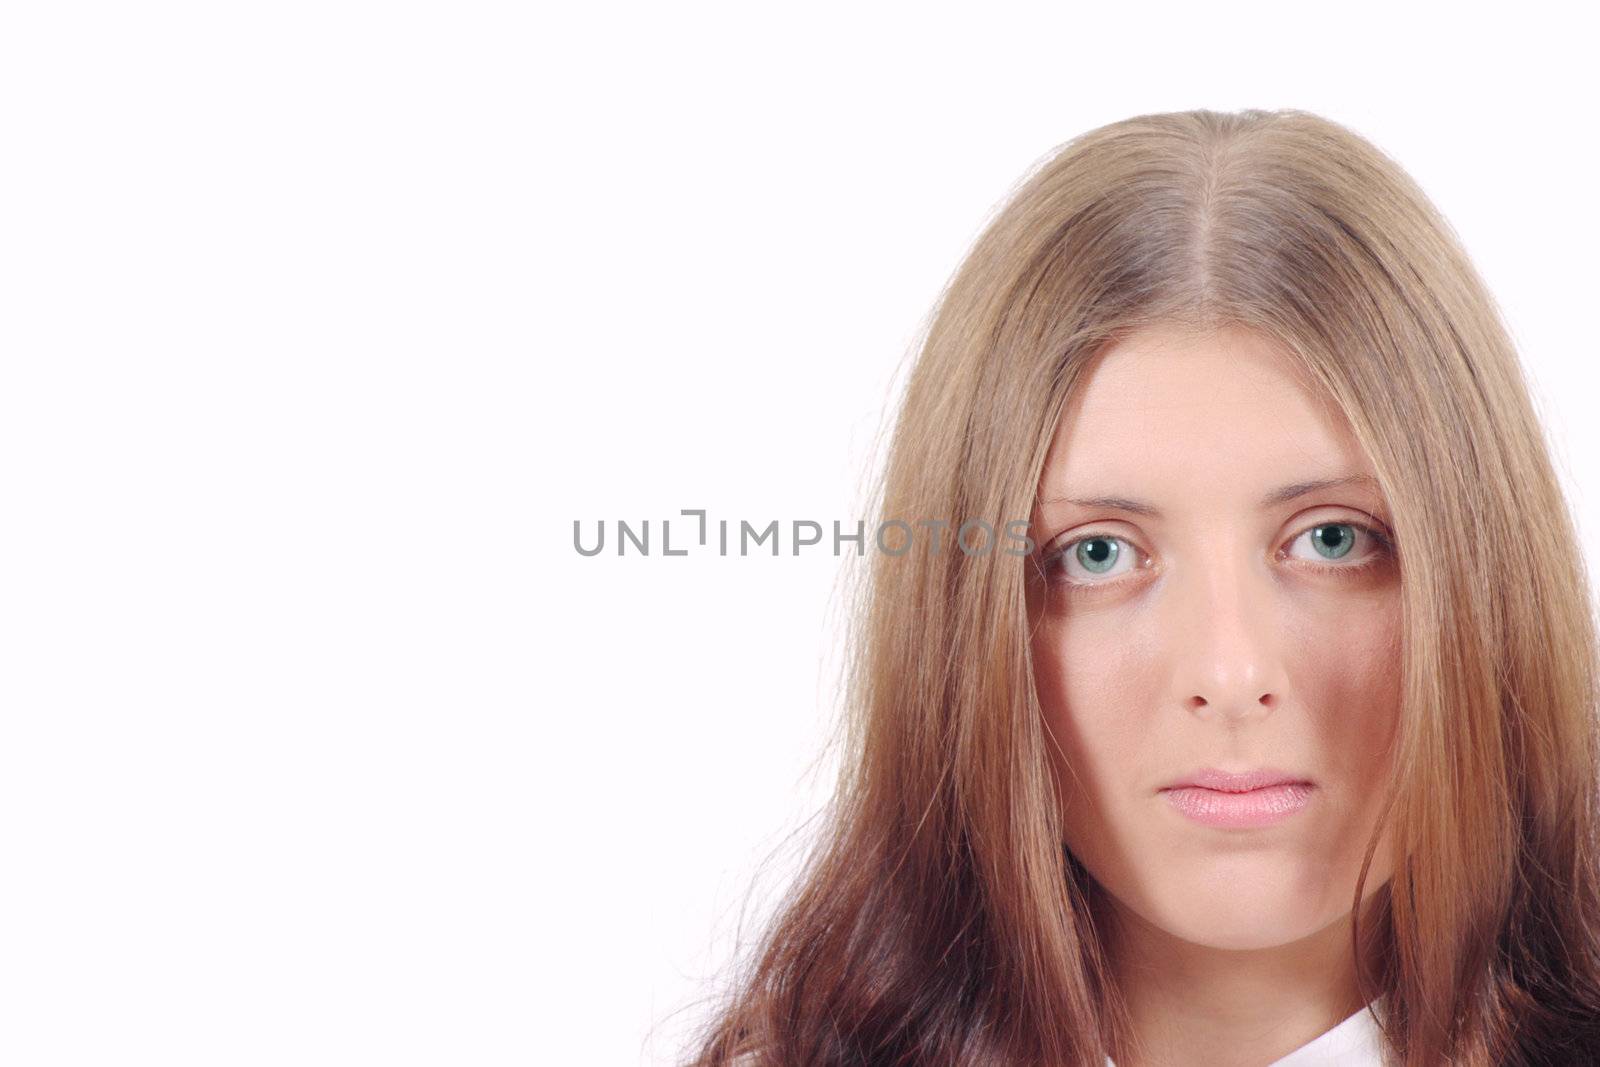 The nice girl removed on a white background. It is not isolated